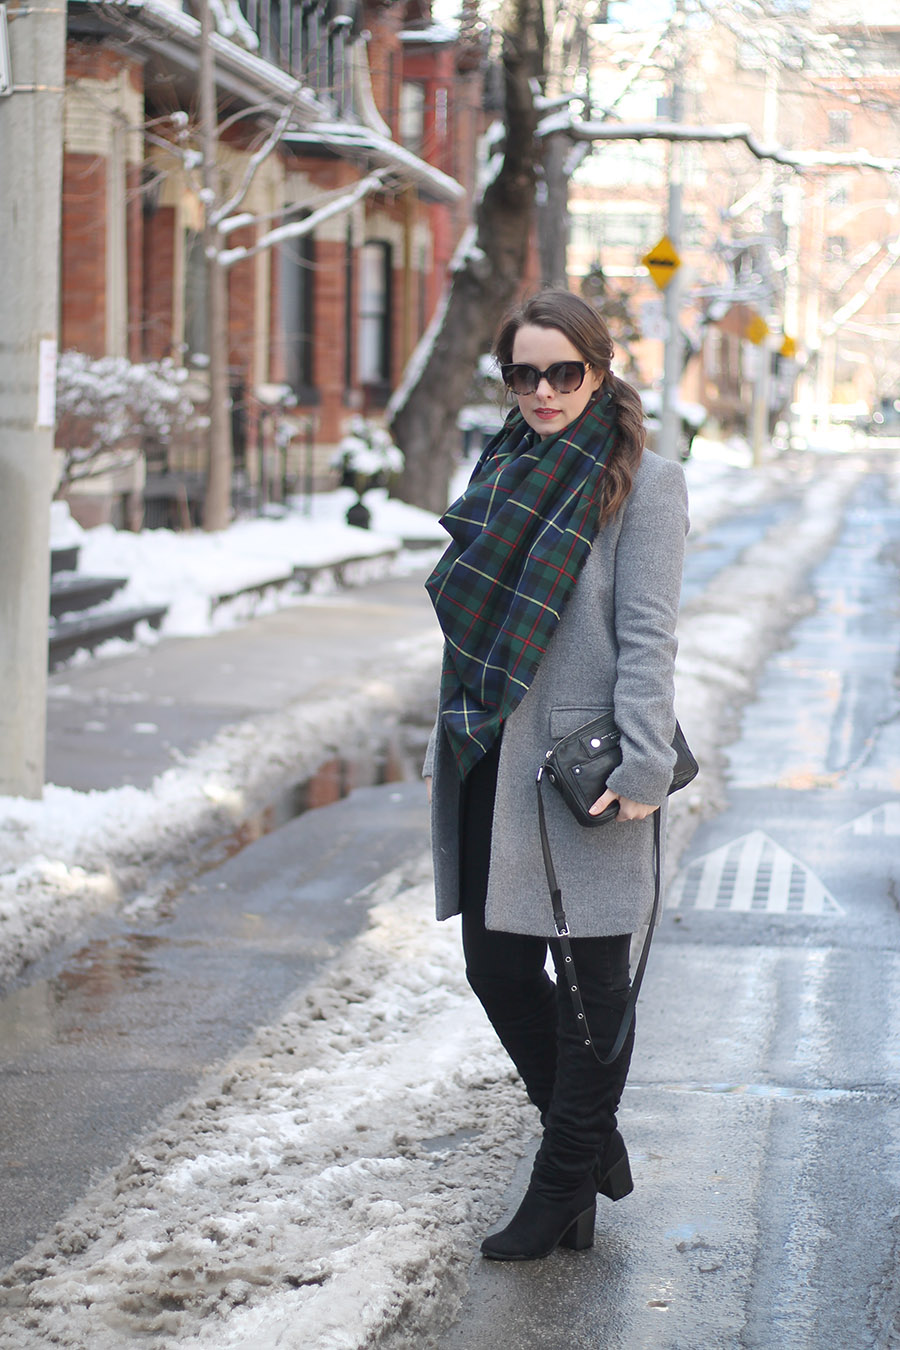 Winter Outfit Ideas For Styling Your Blanket Scarf